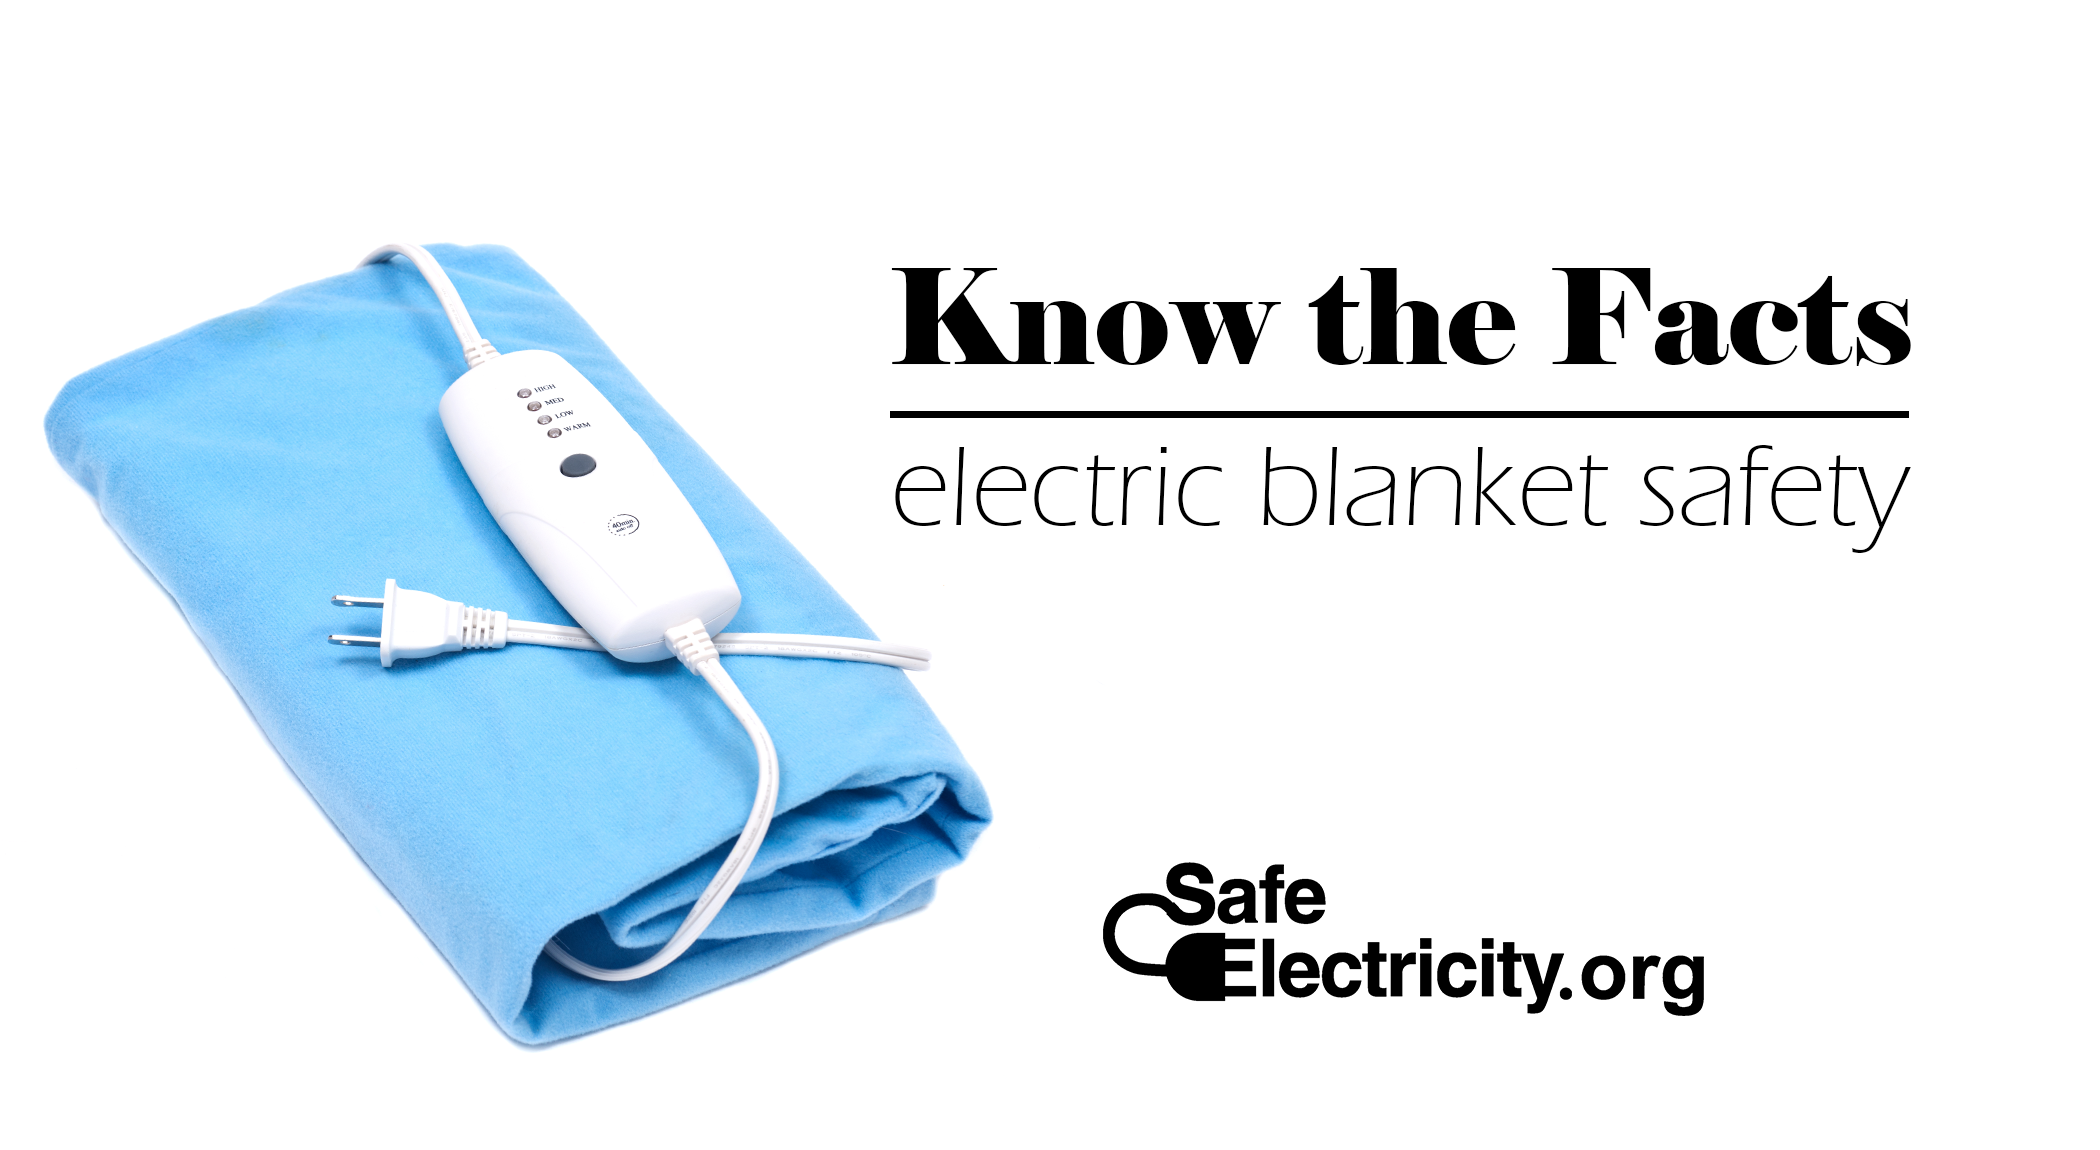 Know the facts: electric blanket safety. SafeElectricity.org